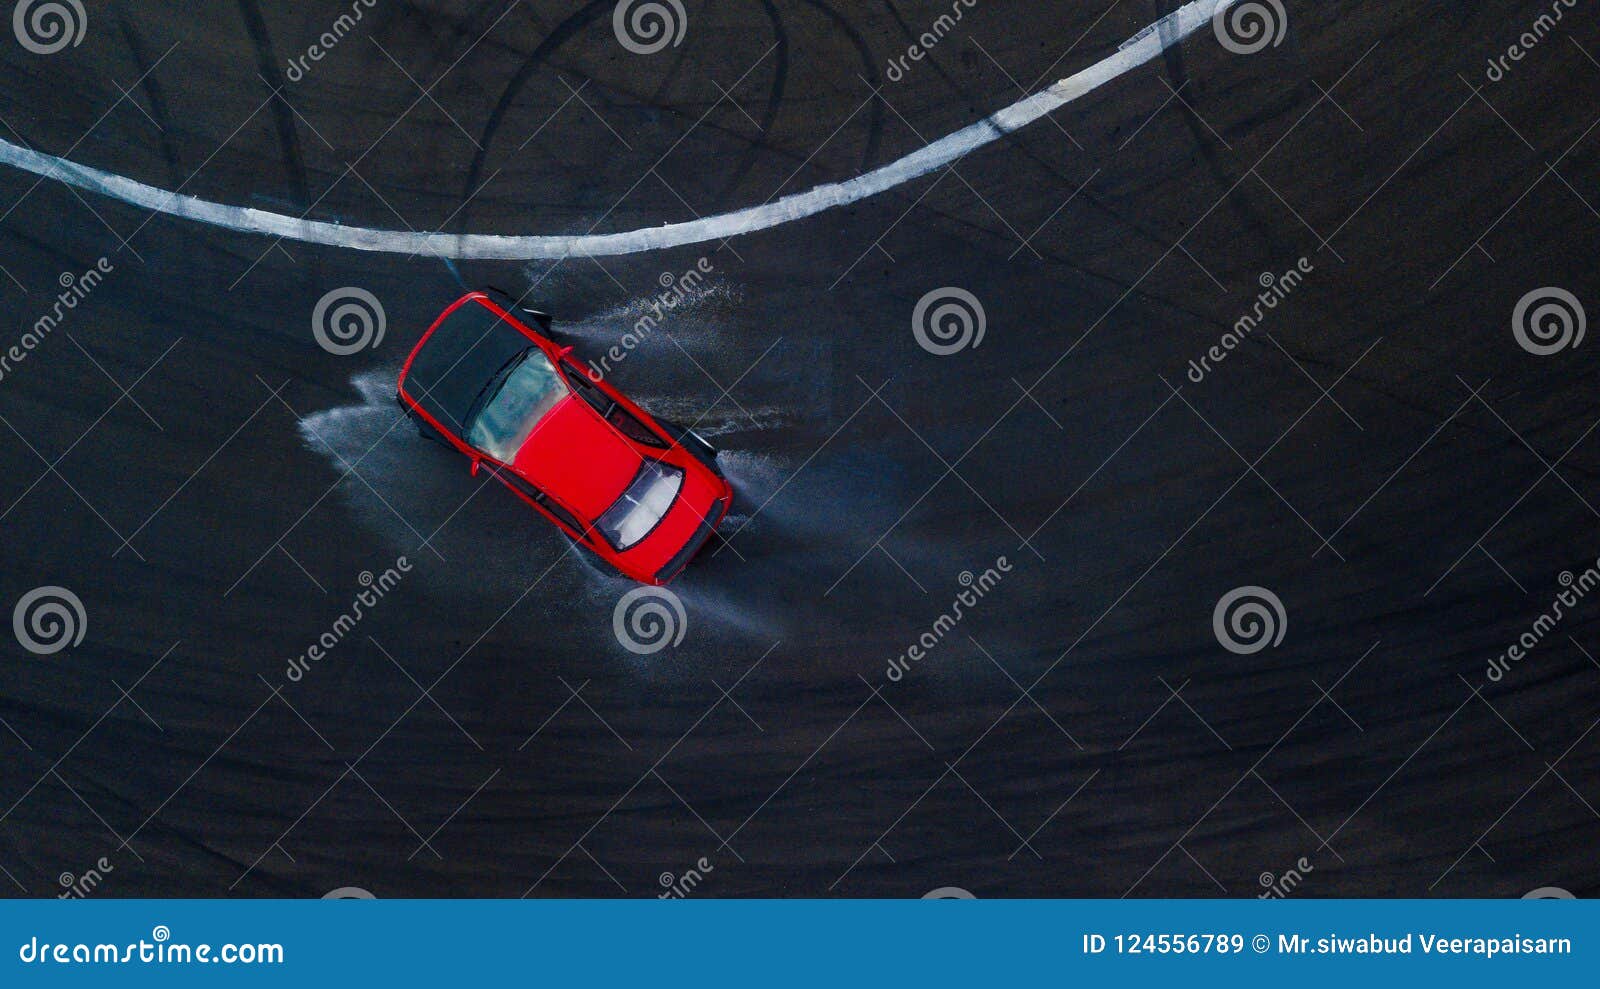 aerial top view professional driver drifting car on wet race track, with water splash, red car.